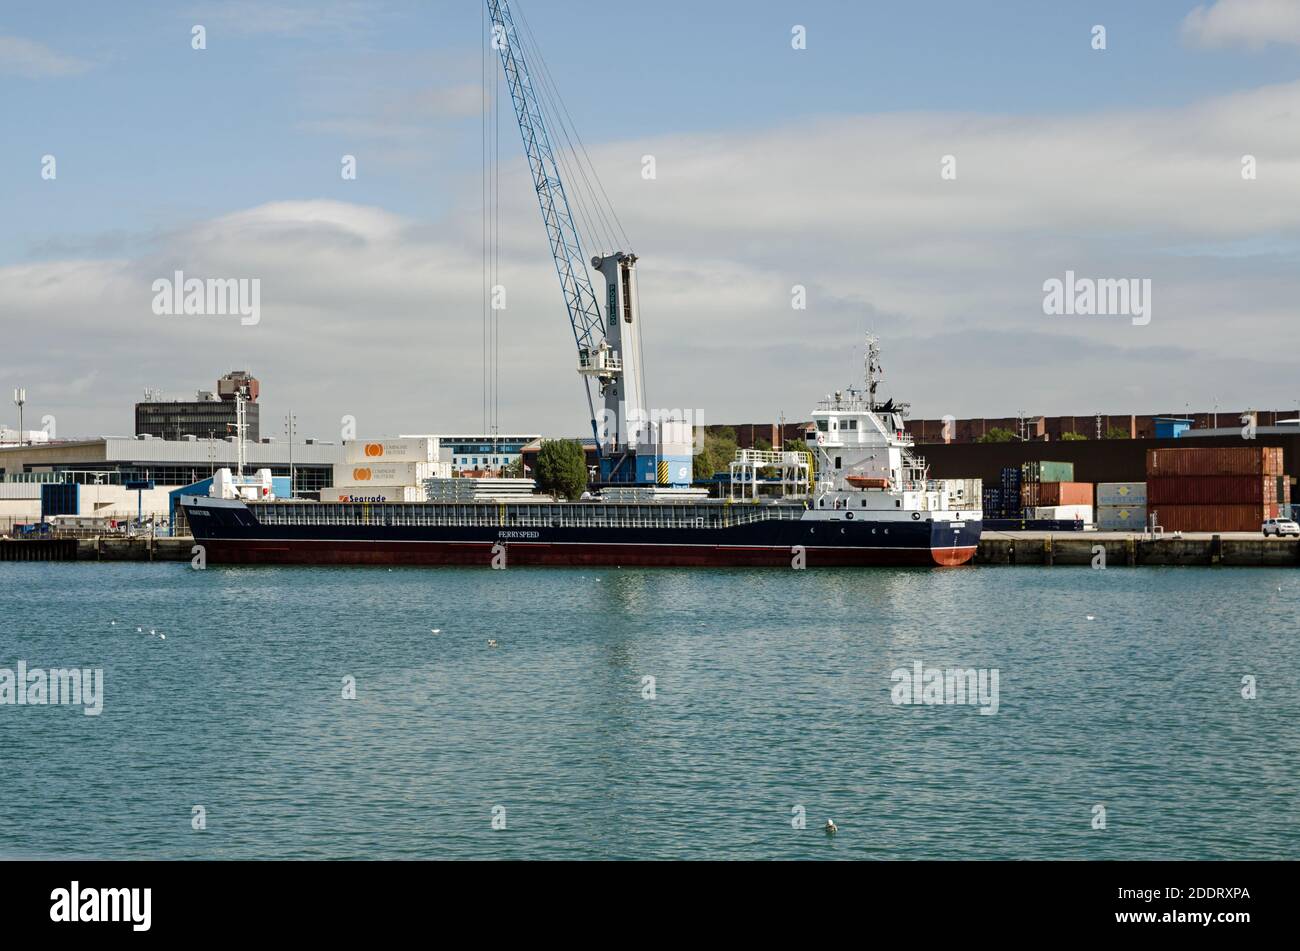 Portsmouth, UK - September 8, 2020: The cargo ship Musketier moored at the dockside in Portsmouth Harbour on a sunny summer day. Stock Photo